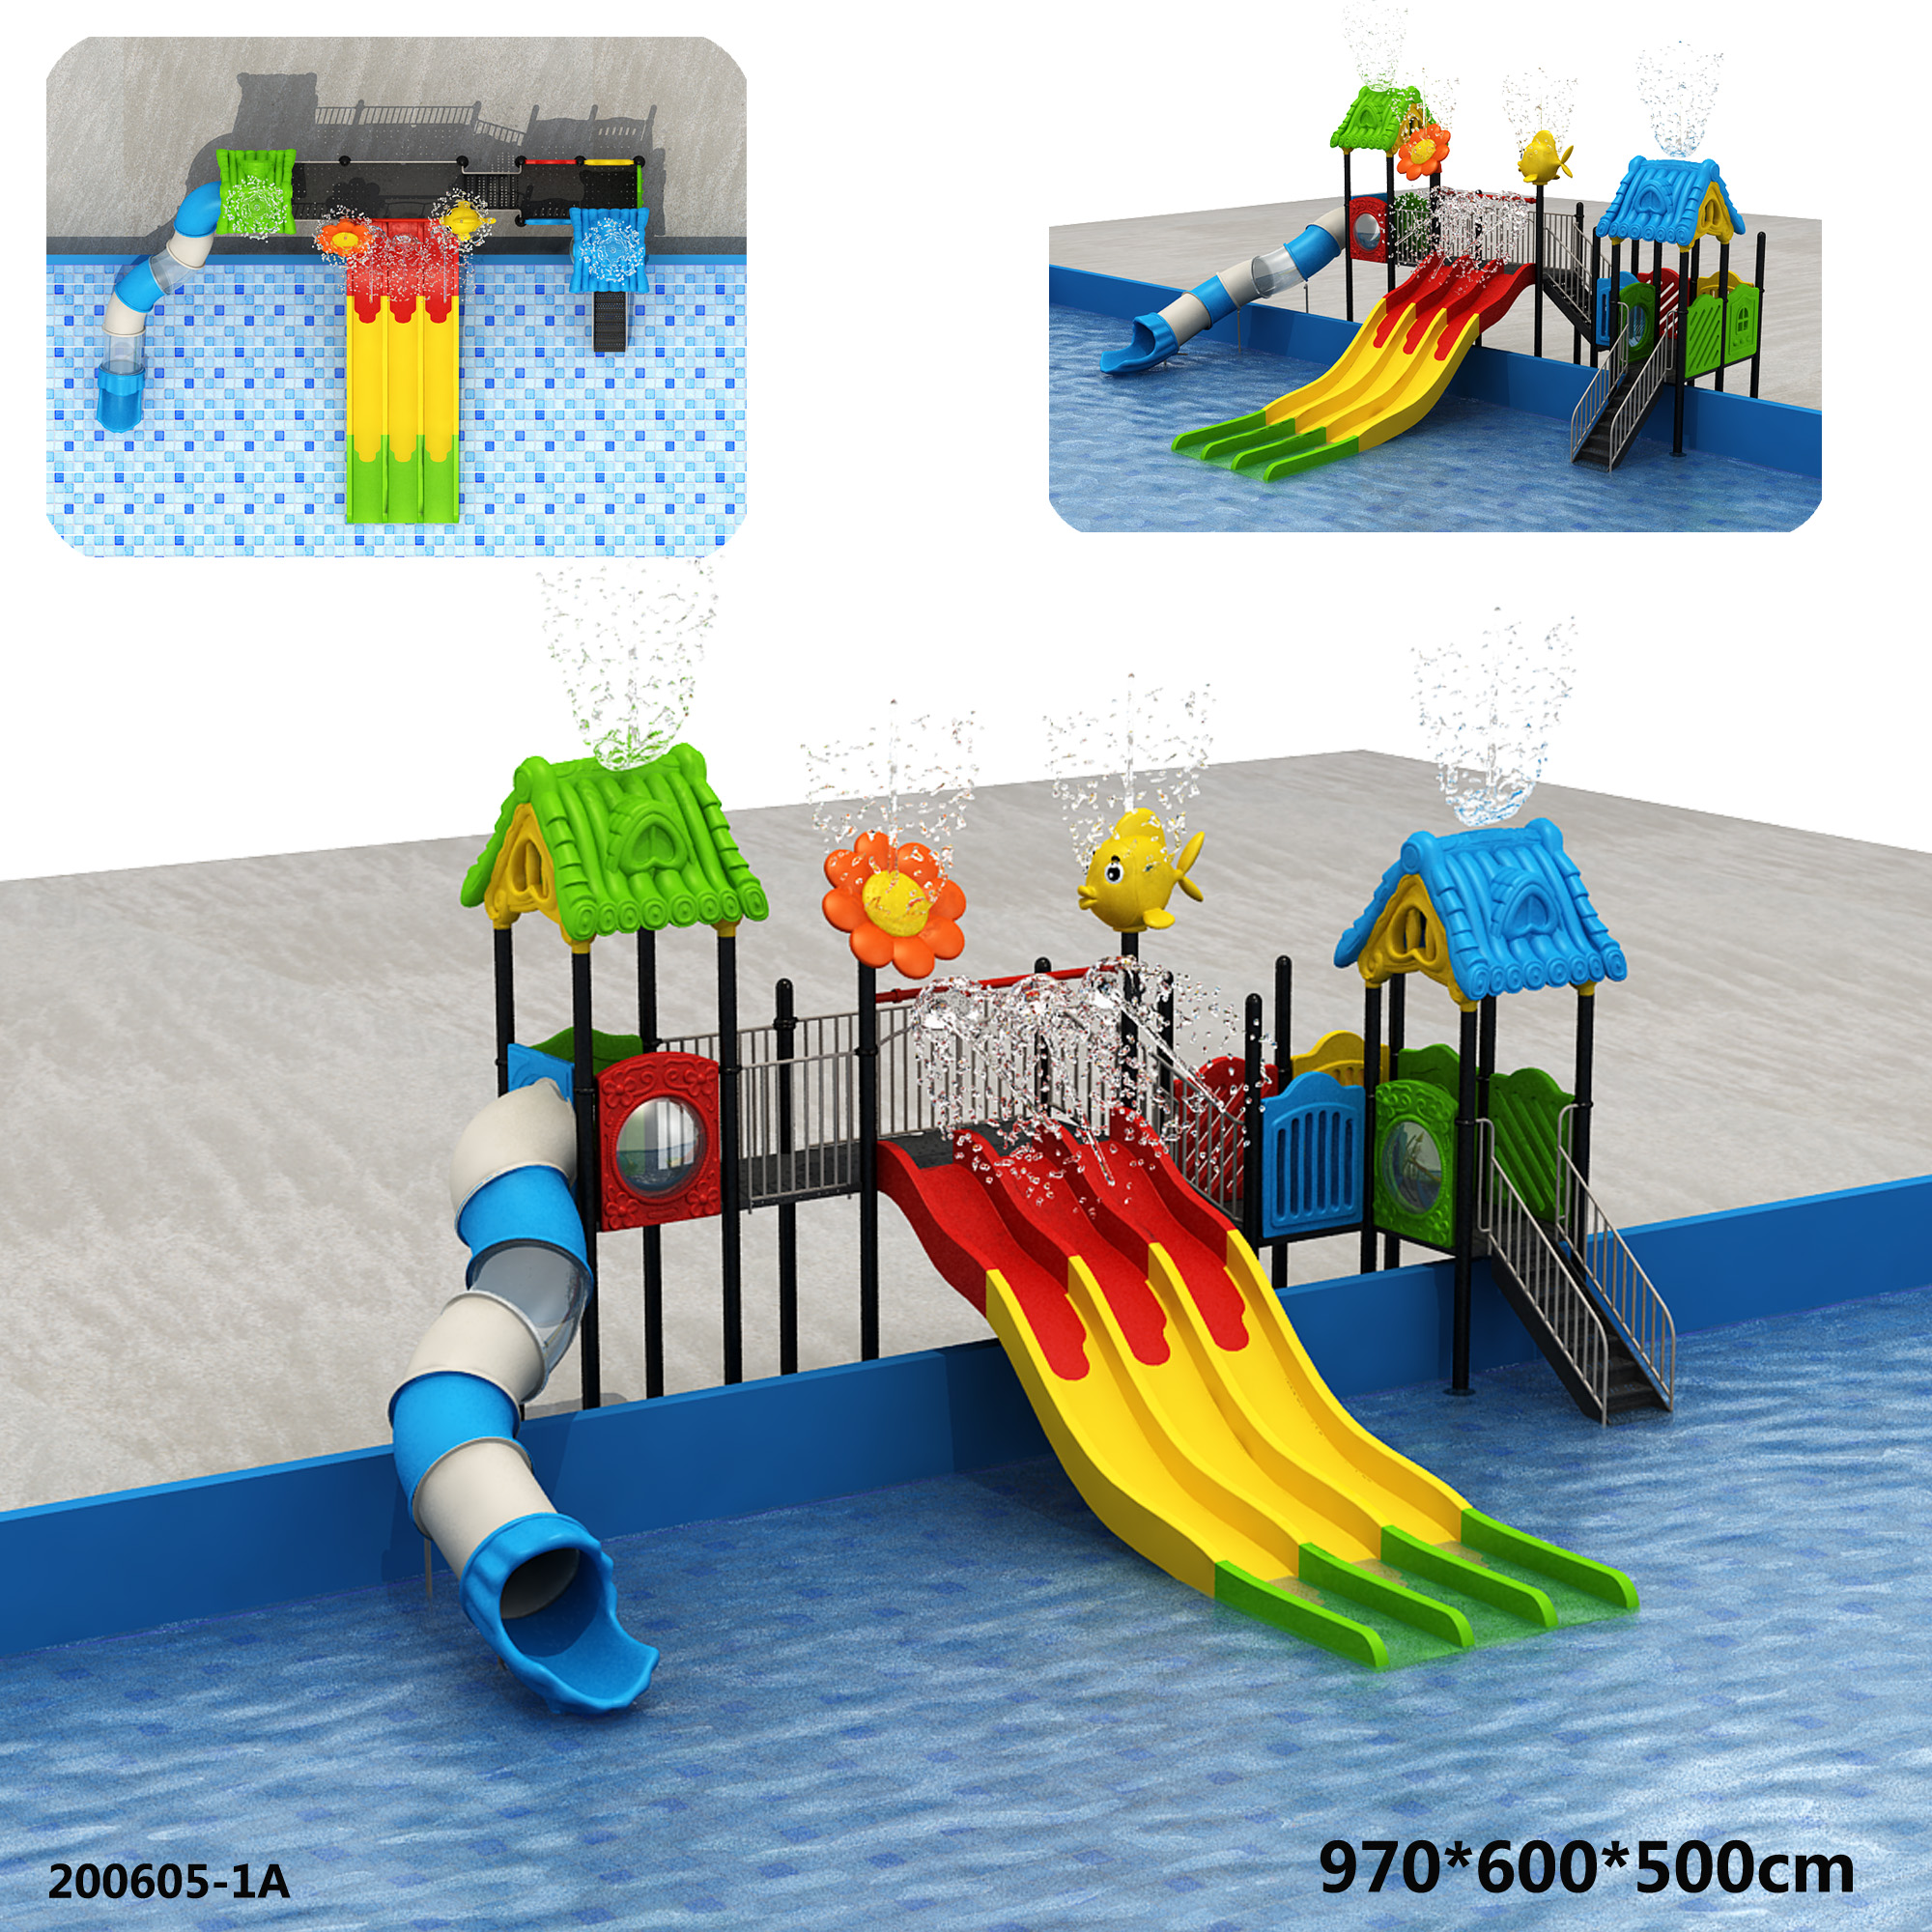 How to clean outdoor water playground equipment